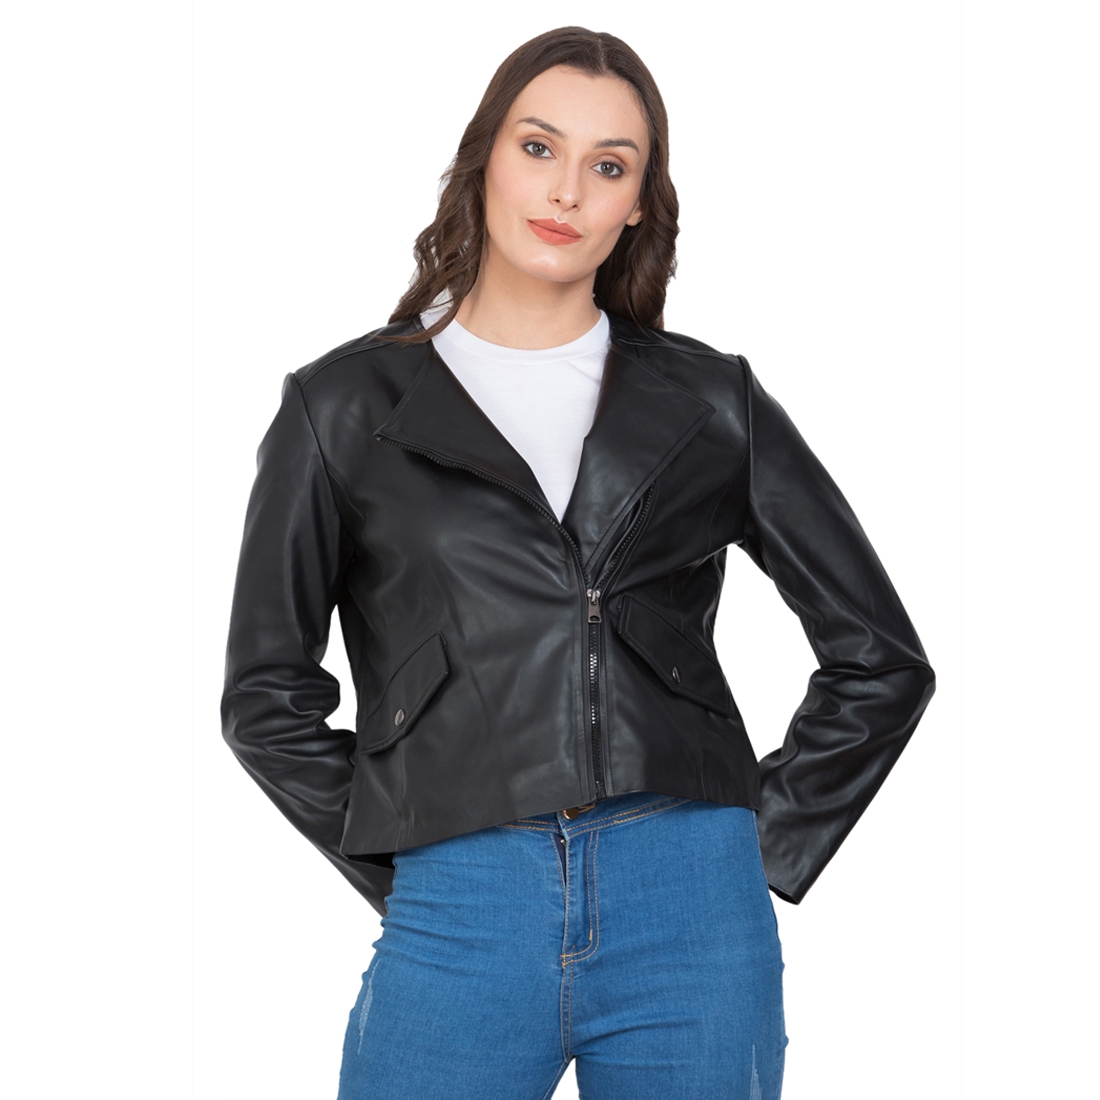 Justanned | JUSTANNED BLACK WIDE COLLAR WOMEN LEATHER JACKET